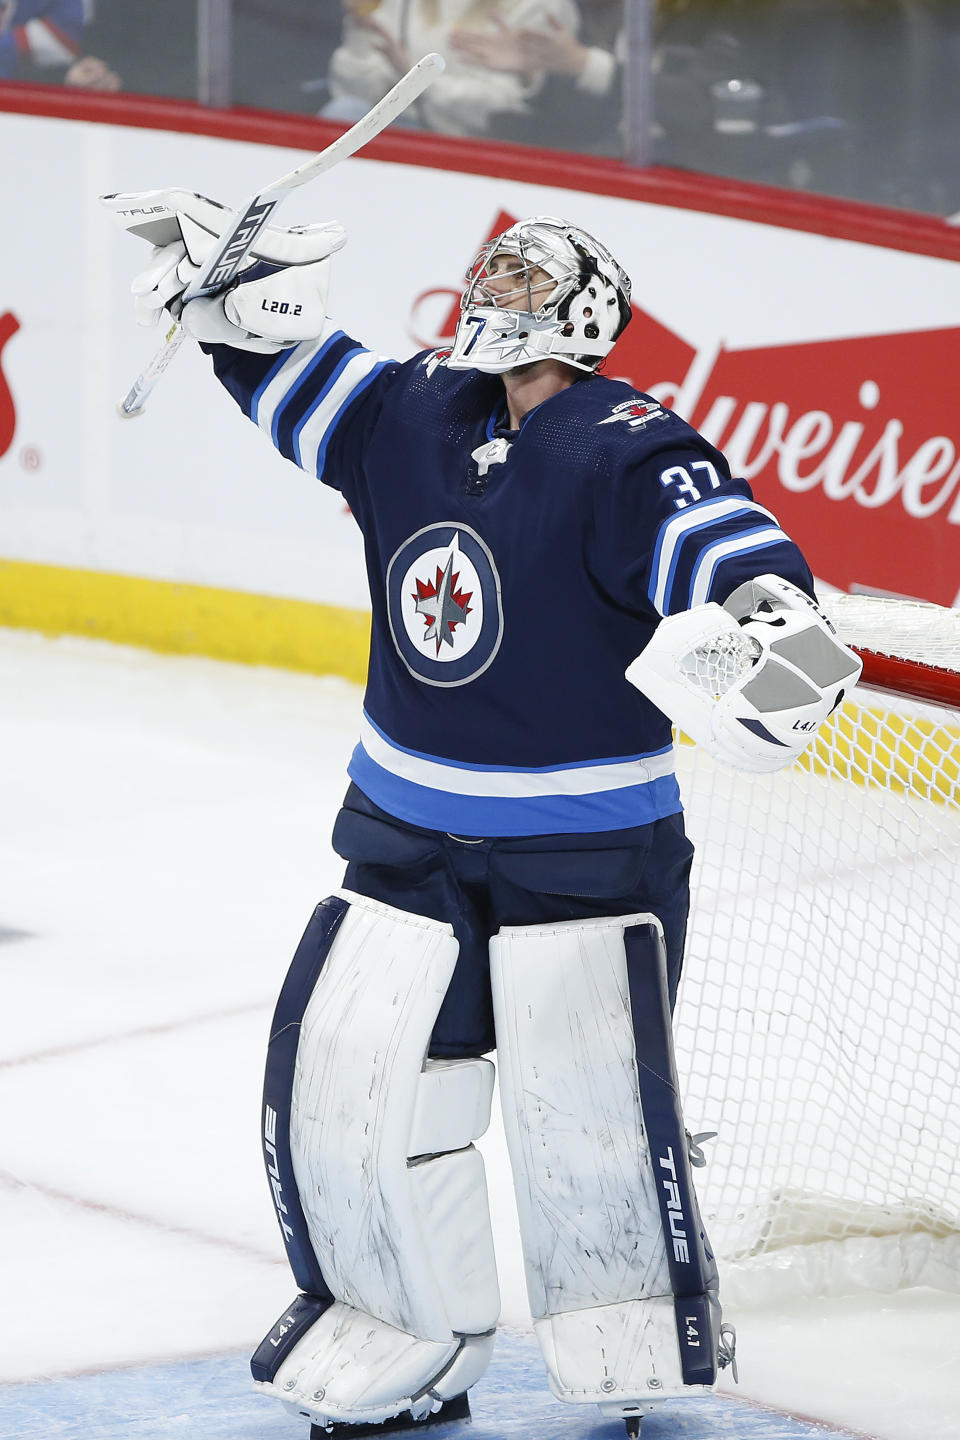 Winnipeg Jets goaltender Connor Hellebuyck (37) celebrates the team's win over the New Jersey Devils in an NHL hockey game Friday, Dec. 3, 2021, in Winnipeg, Manitoba. (John Woods/The Canadian Press via AP)